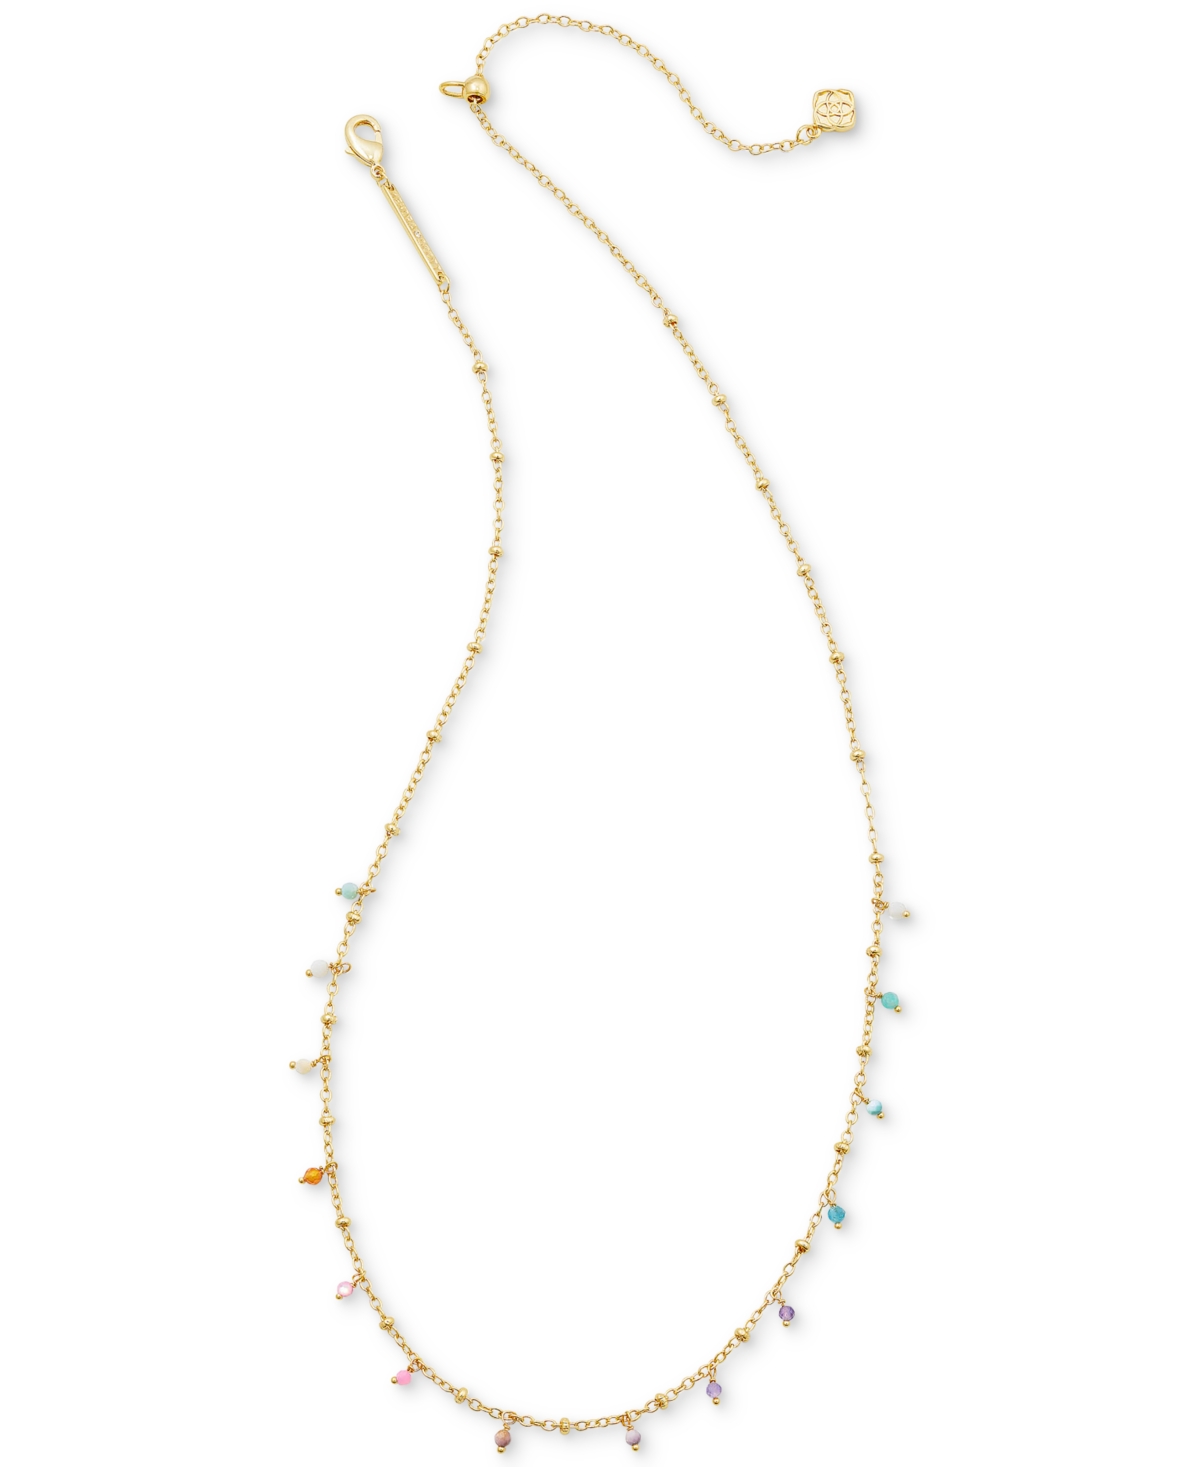 Kendra Scott Gold-tone Camry Beaded Strand 19" Necklace In Pastel Mix